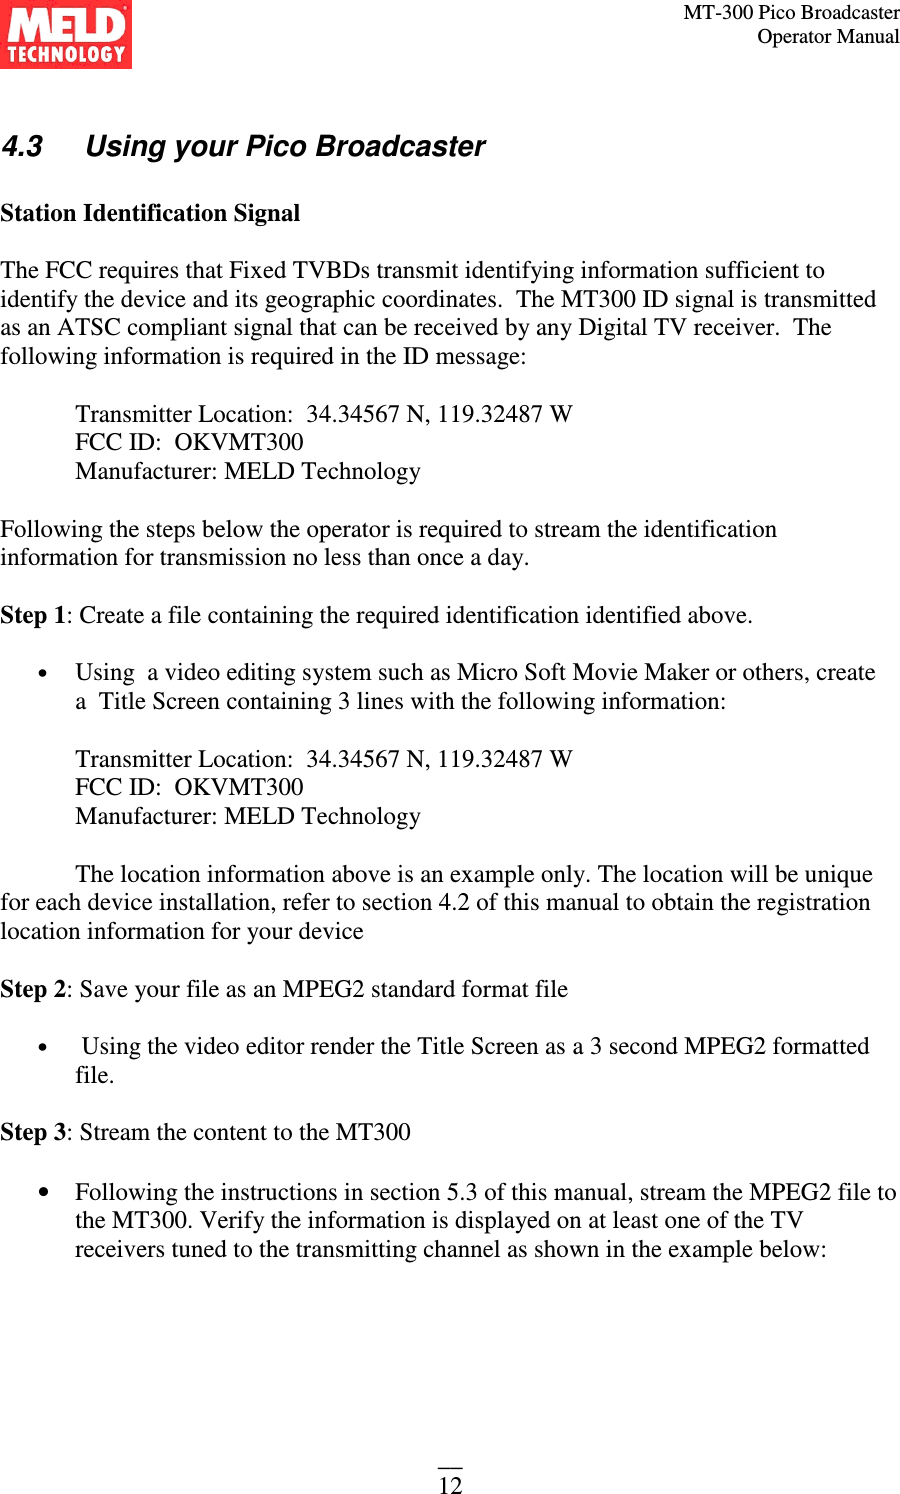 MT-300 Pico Broadcaster                                                                                                                                             Operator Manual __ 12  4.3   Using your Pico Broadcaster  Station Identification Signal  The FCC requires that Fixed TVBDs transmit identifying information sufficient to identify the device and its geographic coordinates.  The MT300 ID signal is transmitted as an ATSC compliant signal that can be received by any Digital TV receiver.  The following information is required in the ID message:    Transmitter Location:  34.34567 N, 119.32487 W FCC ID:  OKVMT300 Manufacturer: MELD Technology    Following the steps below the operator is required to stream the identification information for transmission no less than once a day.  Step 1: Create a file containing the required identification identified above.  • Using  a video editing system such as Micro Soft Movie Maker or others, create a  Title Screen containing 3 lines with the following information:  Transmitter Location:  34.34567 N, 119.32487 W  FCC ID:  OKVMT300  Manufacturer: MELD Technology      The location information above is an example only. The location will be unique for each device installation, refer to section 4.2 of this manual to obtain the registration location information for your device  Step 2: Save your file as an MPEG2 standard format file  •  Using the video editor render the Title Screen as a 3 second MPEG2 formatted file.  Step 3: Stream the content to the MT300  • Following the instructions in section 5.3 of this manual, stream the MPEG2 file to the MT300. Verify the information is displayed on at least one of the TV receivers tuned to the transmitting channel as shown in the example below:  